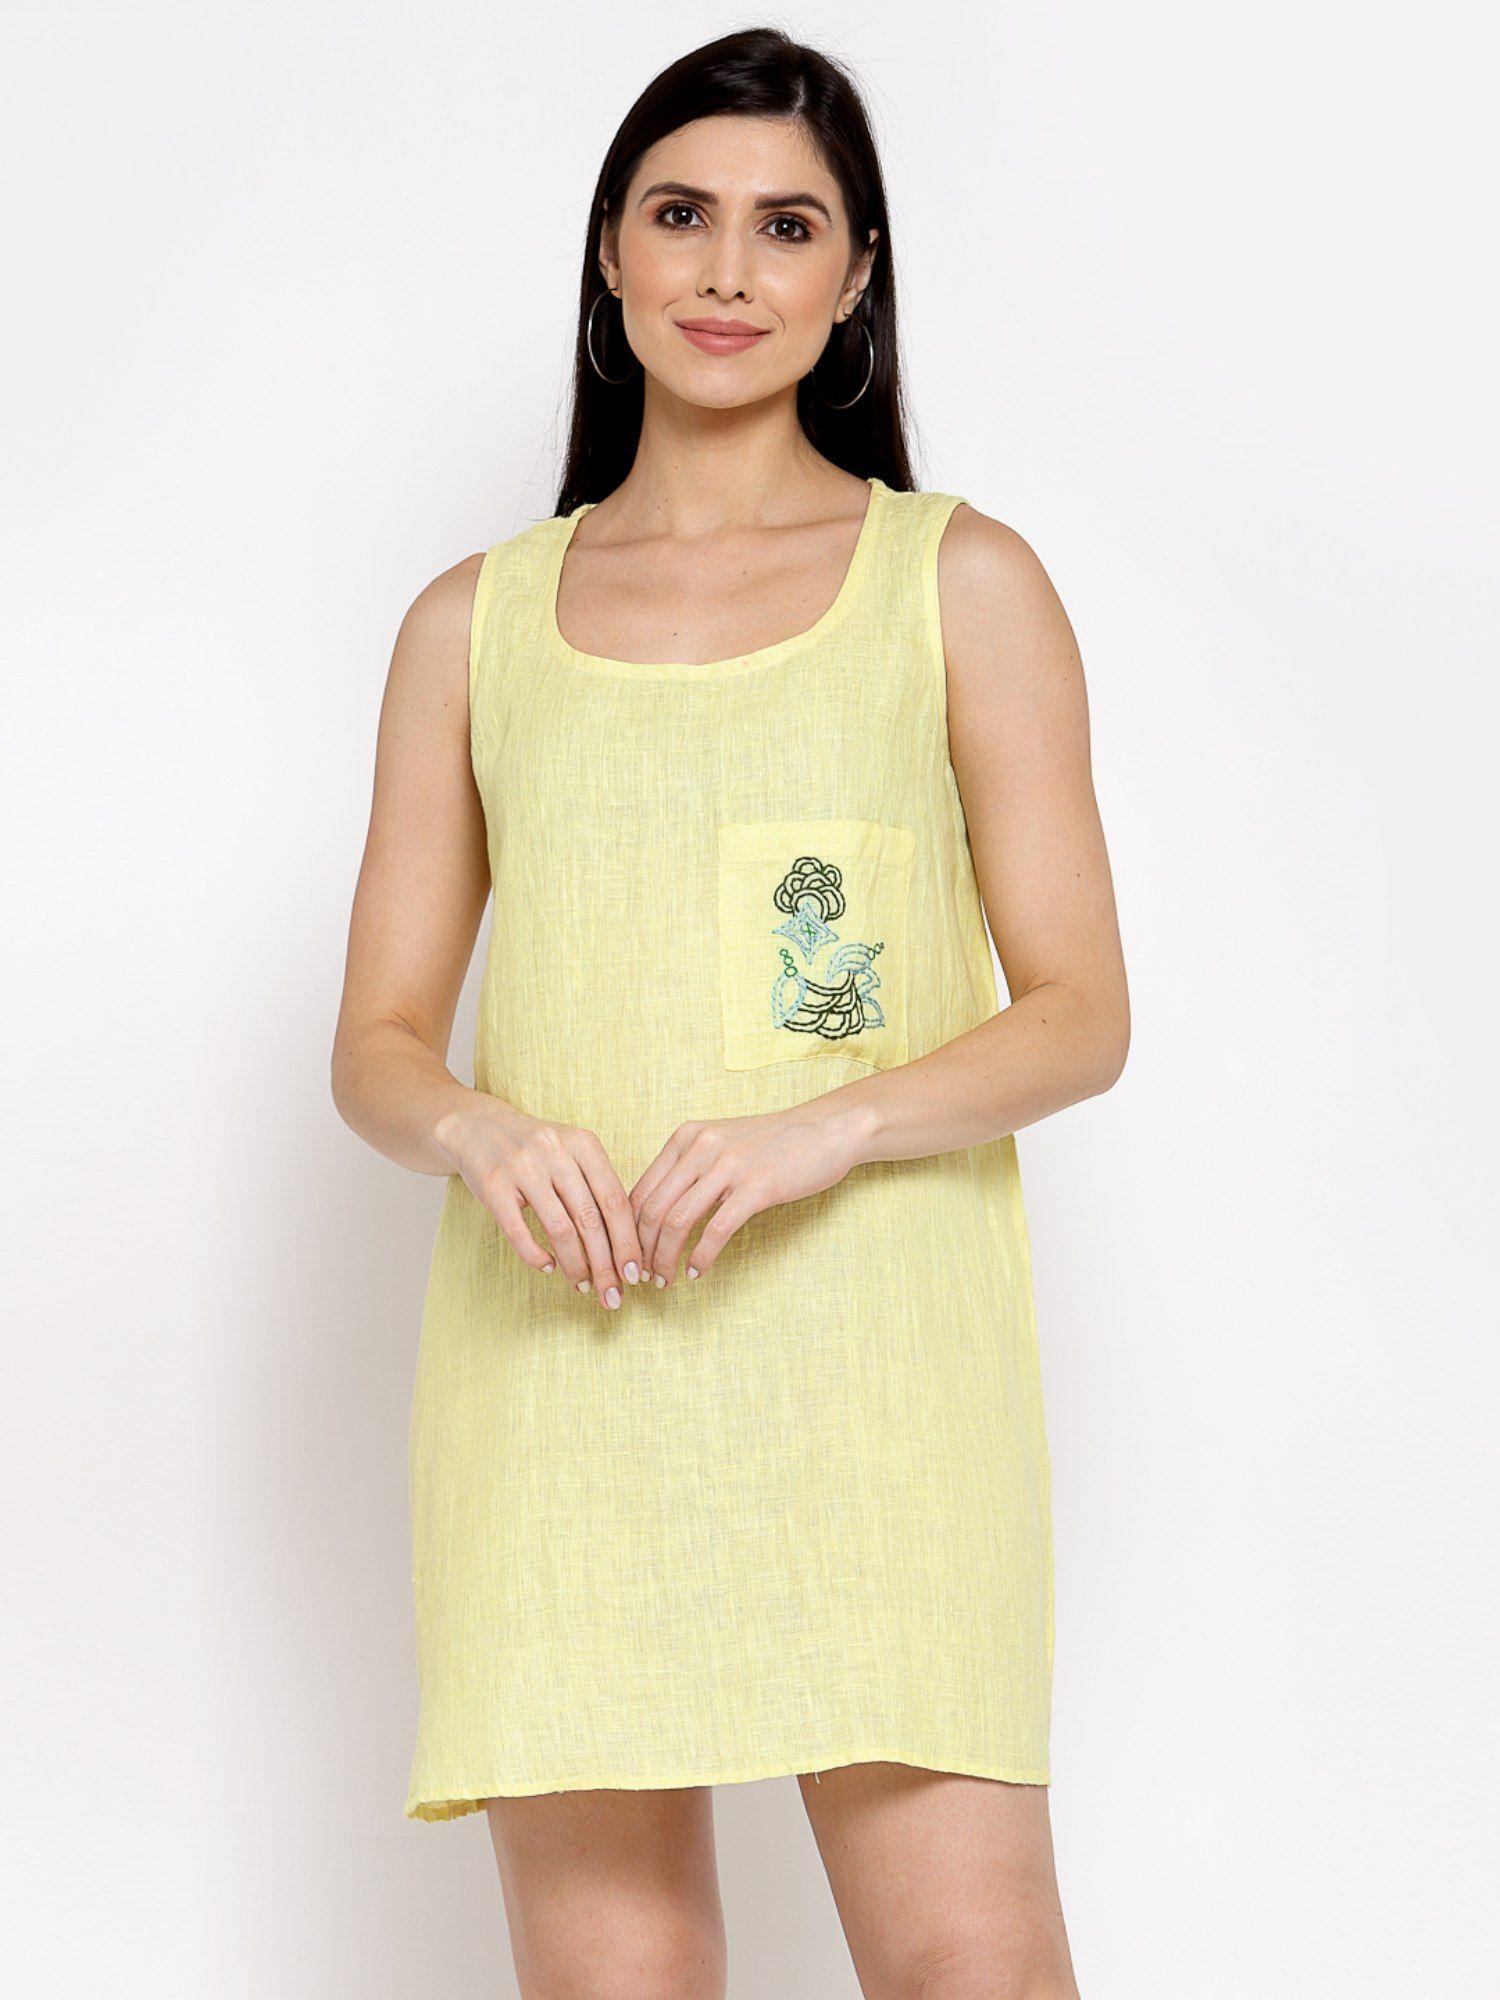 linen dress with hand embroidery on it -yellow